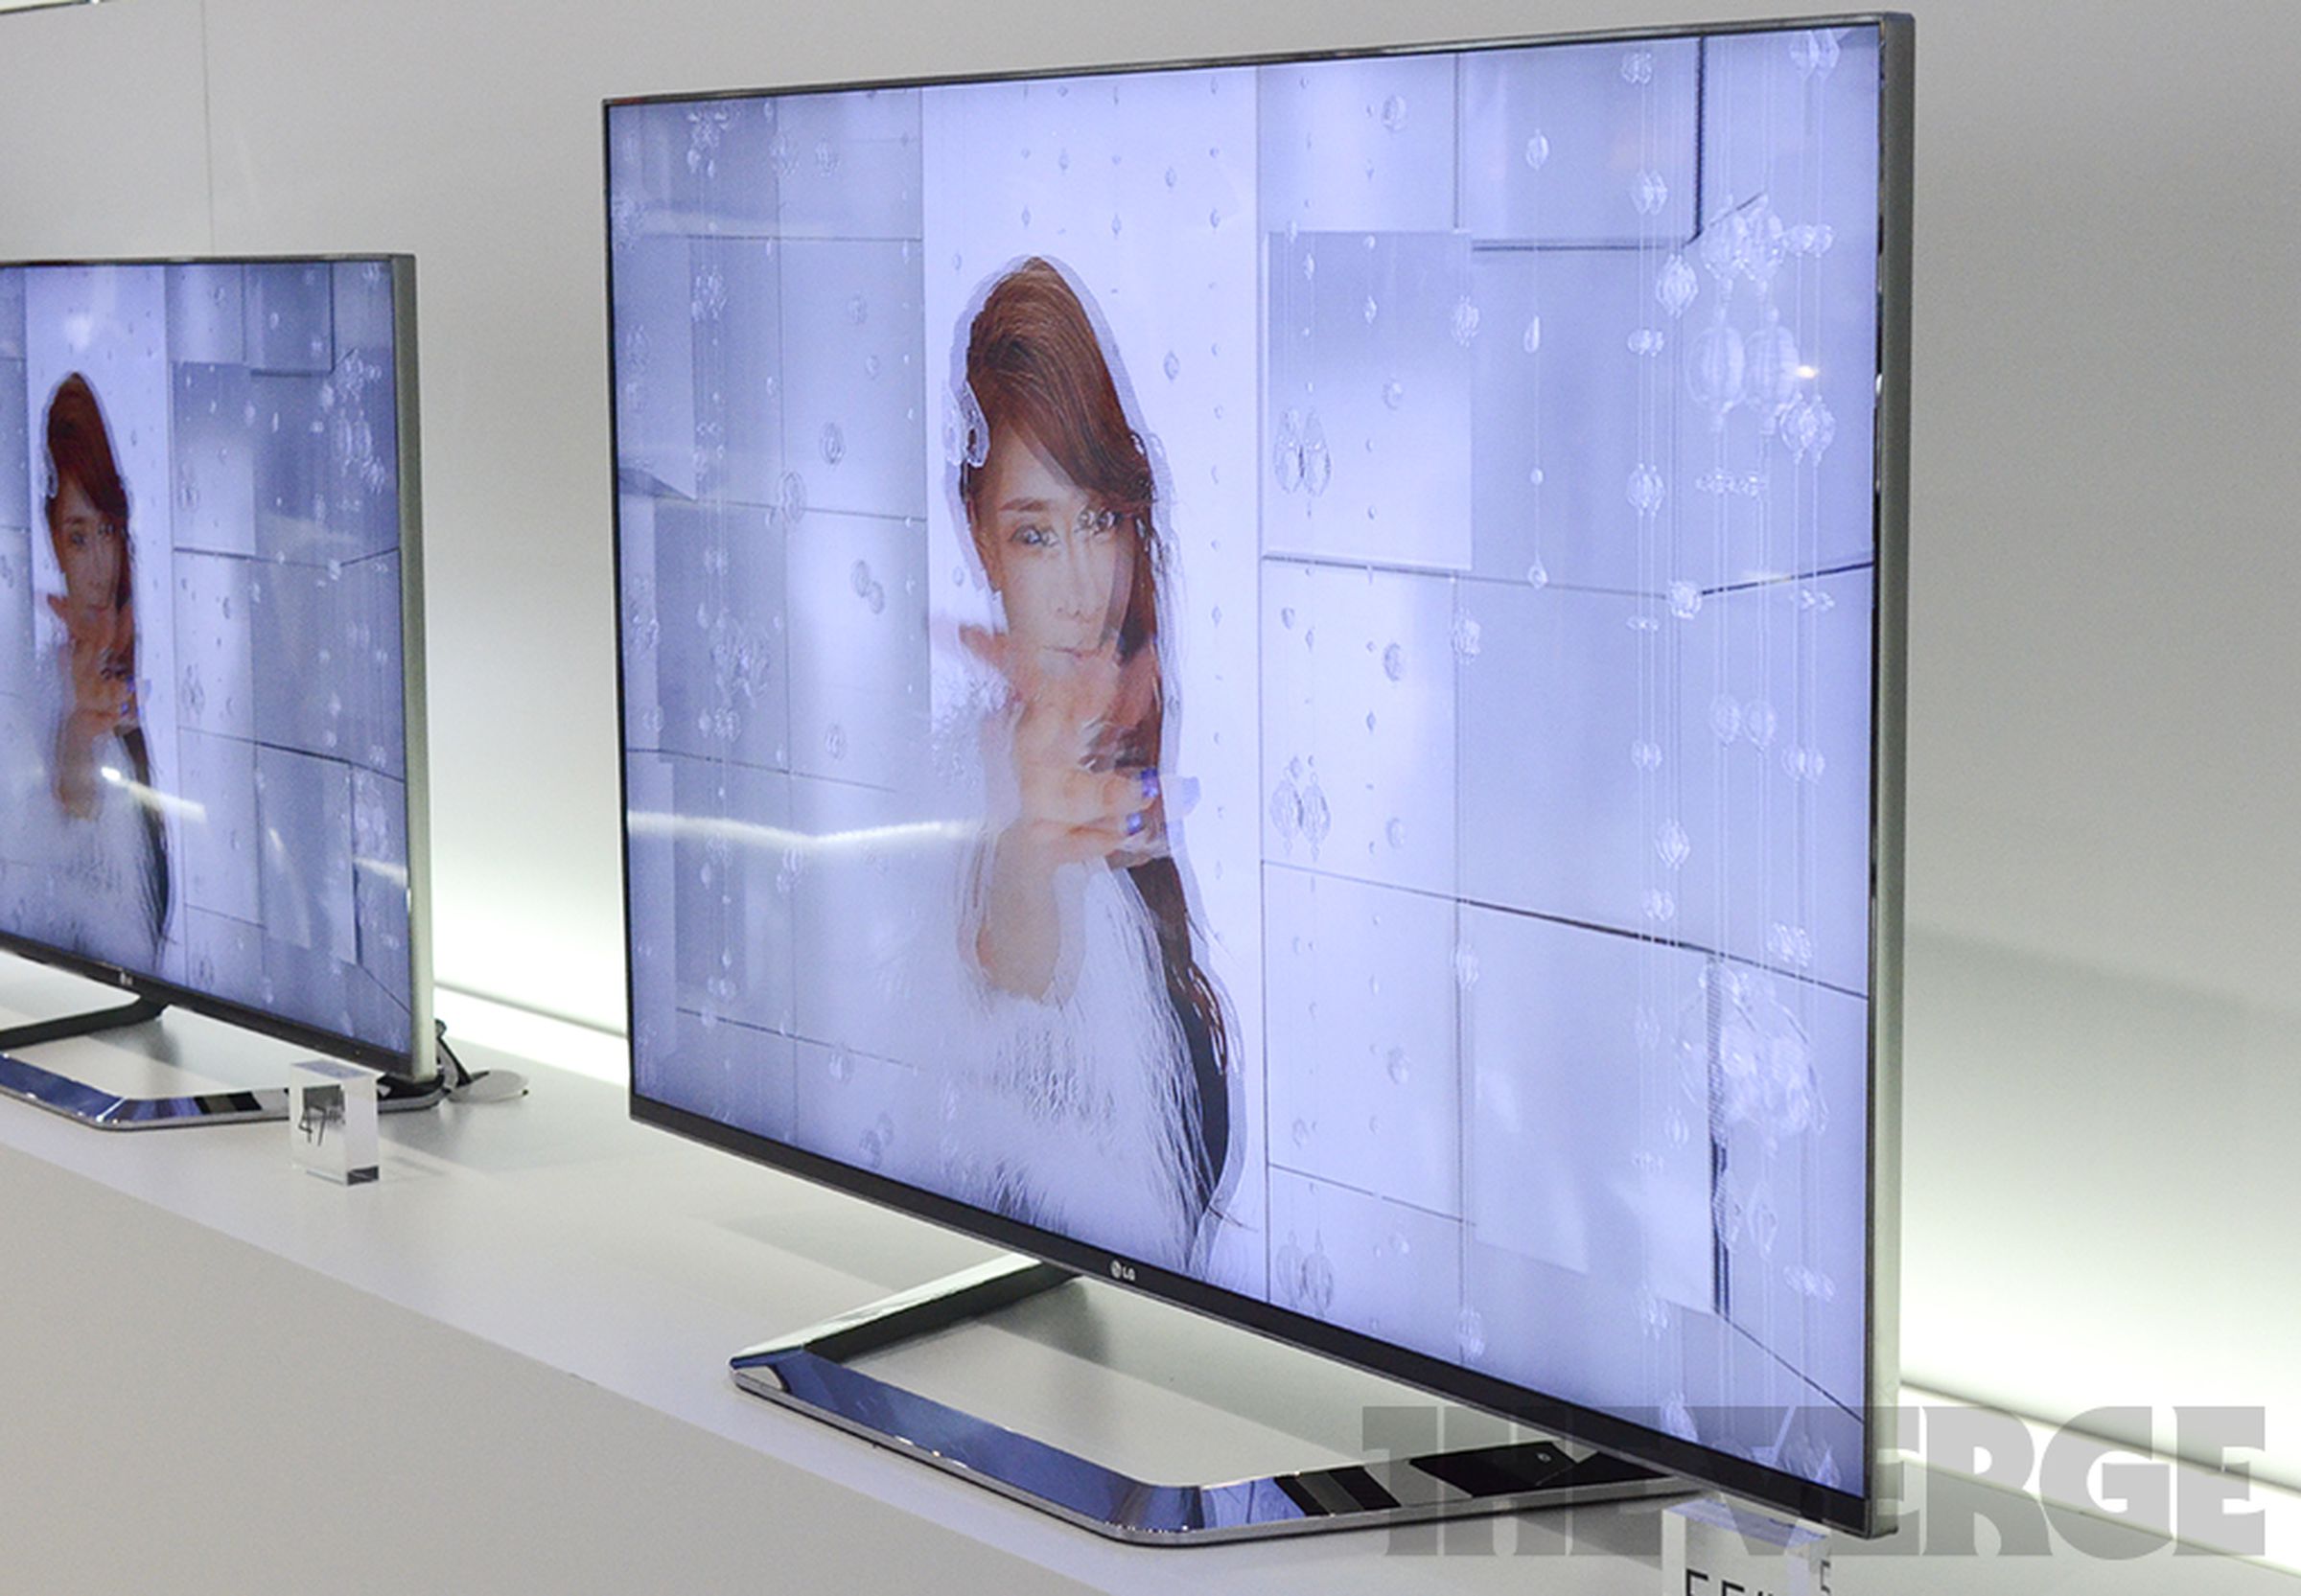 LG LM9600 hands-on